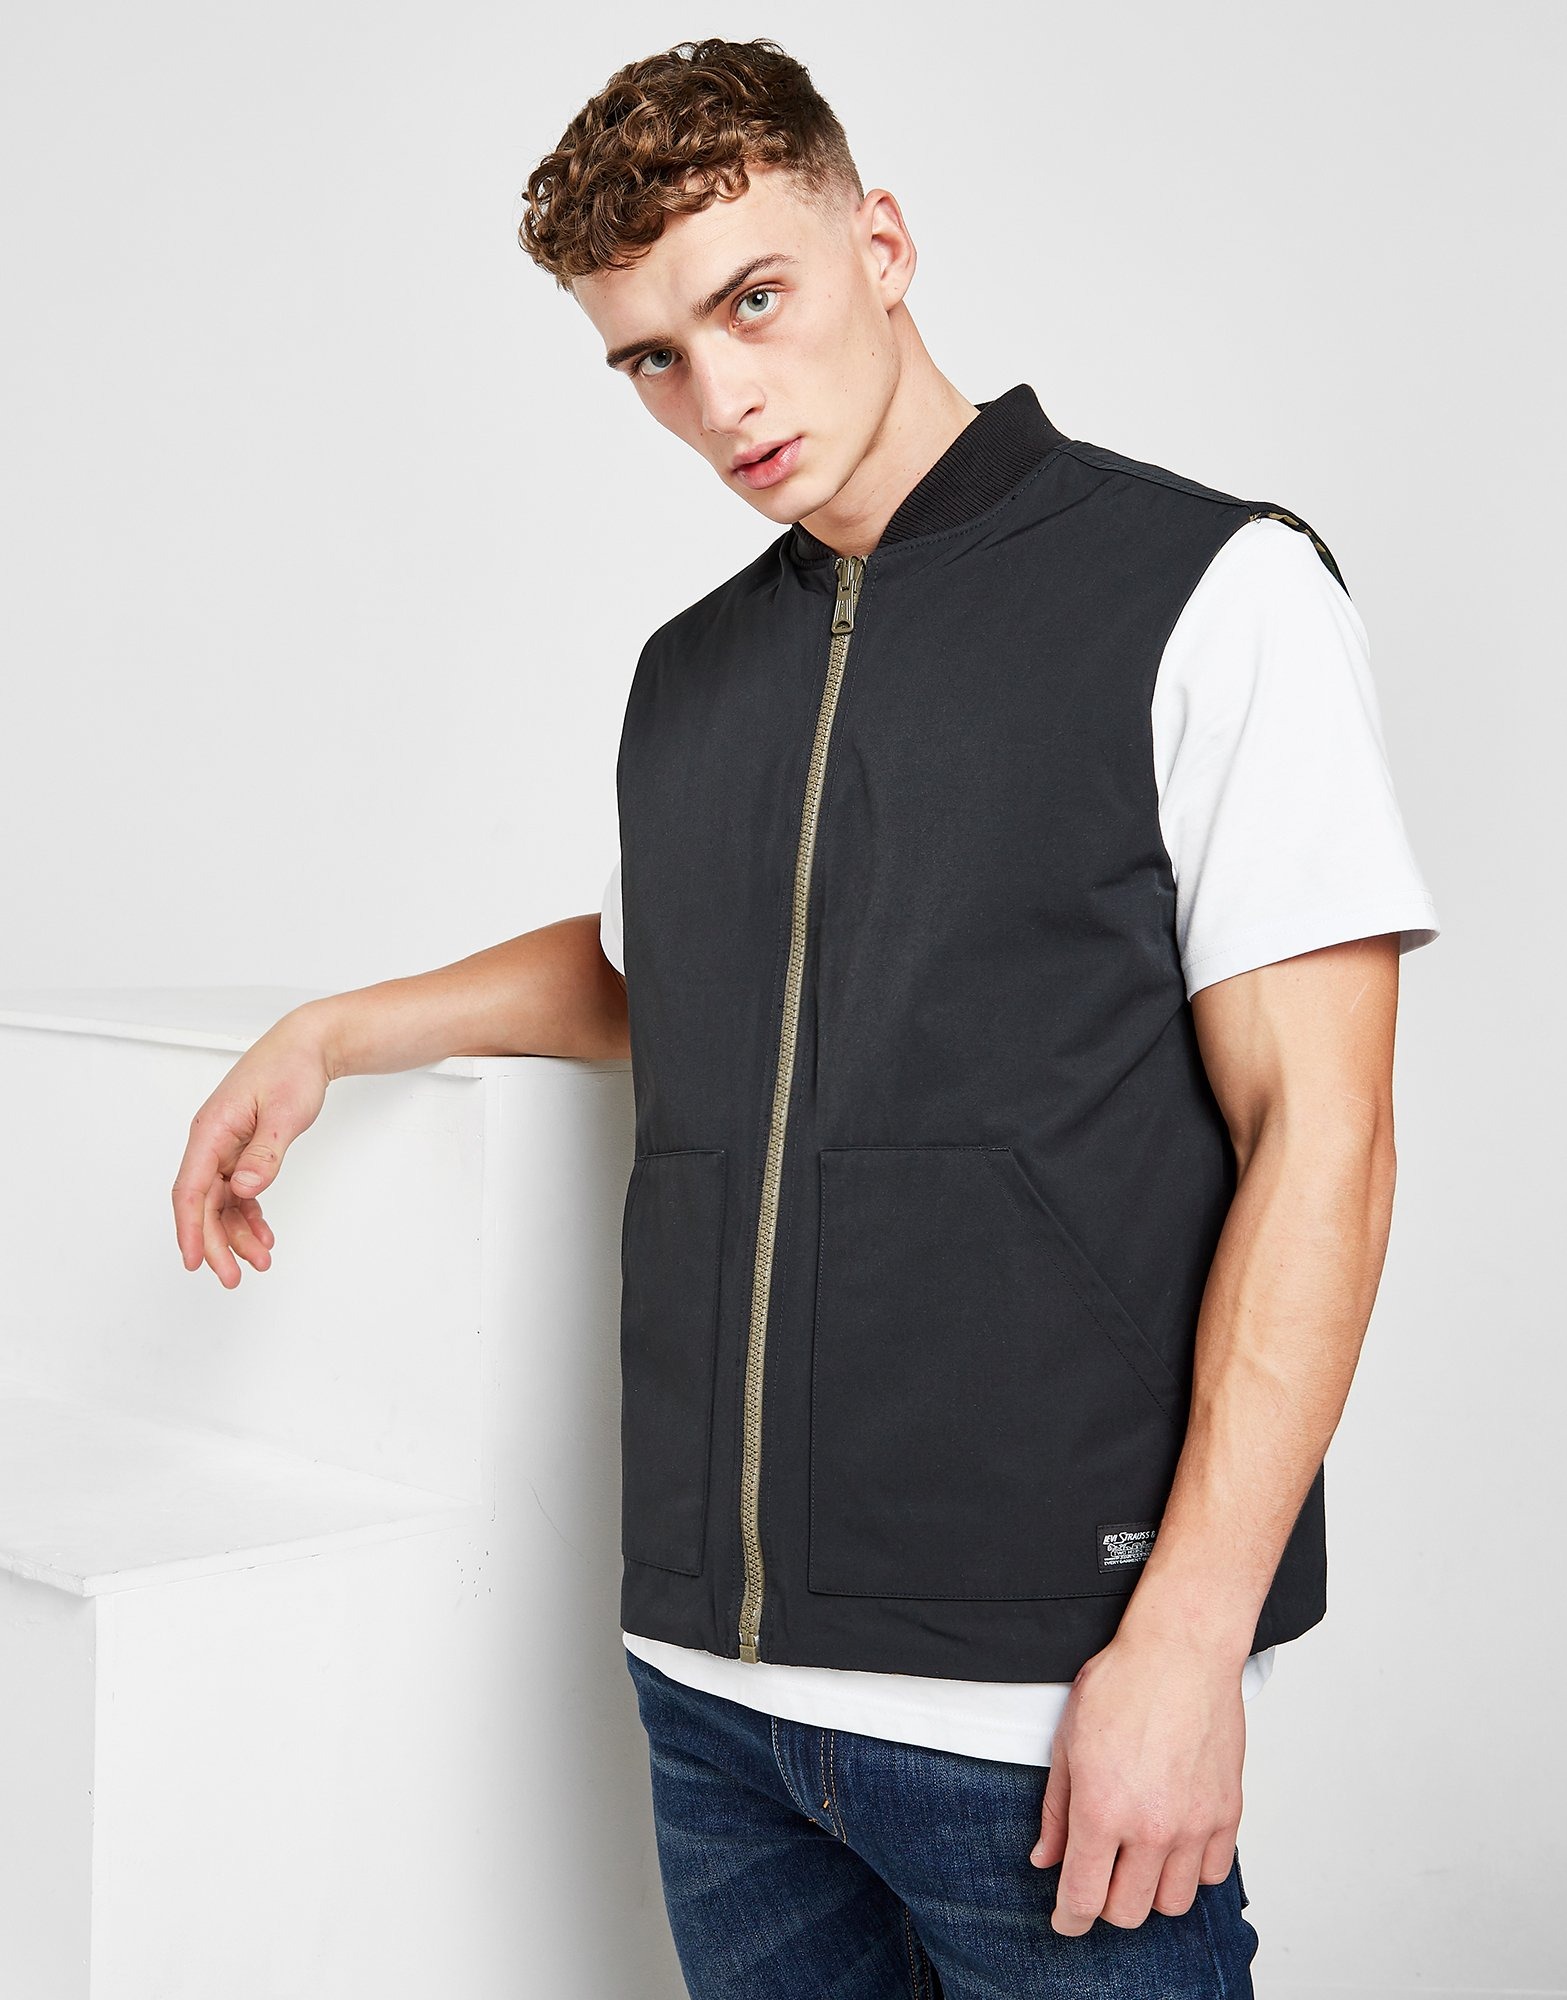 Buy Levis  Reversible Quilted Gilet  JD Sports